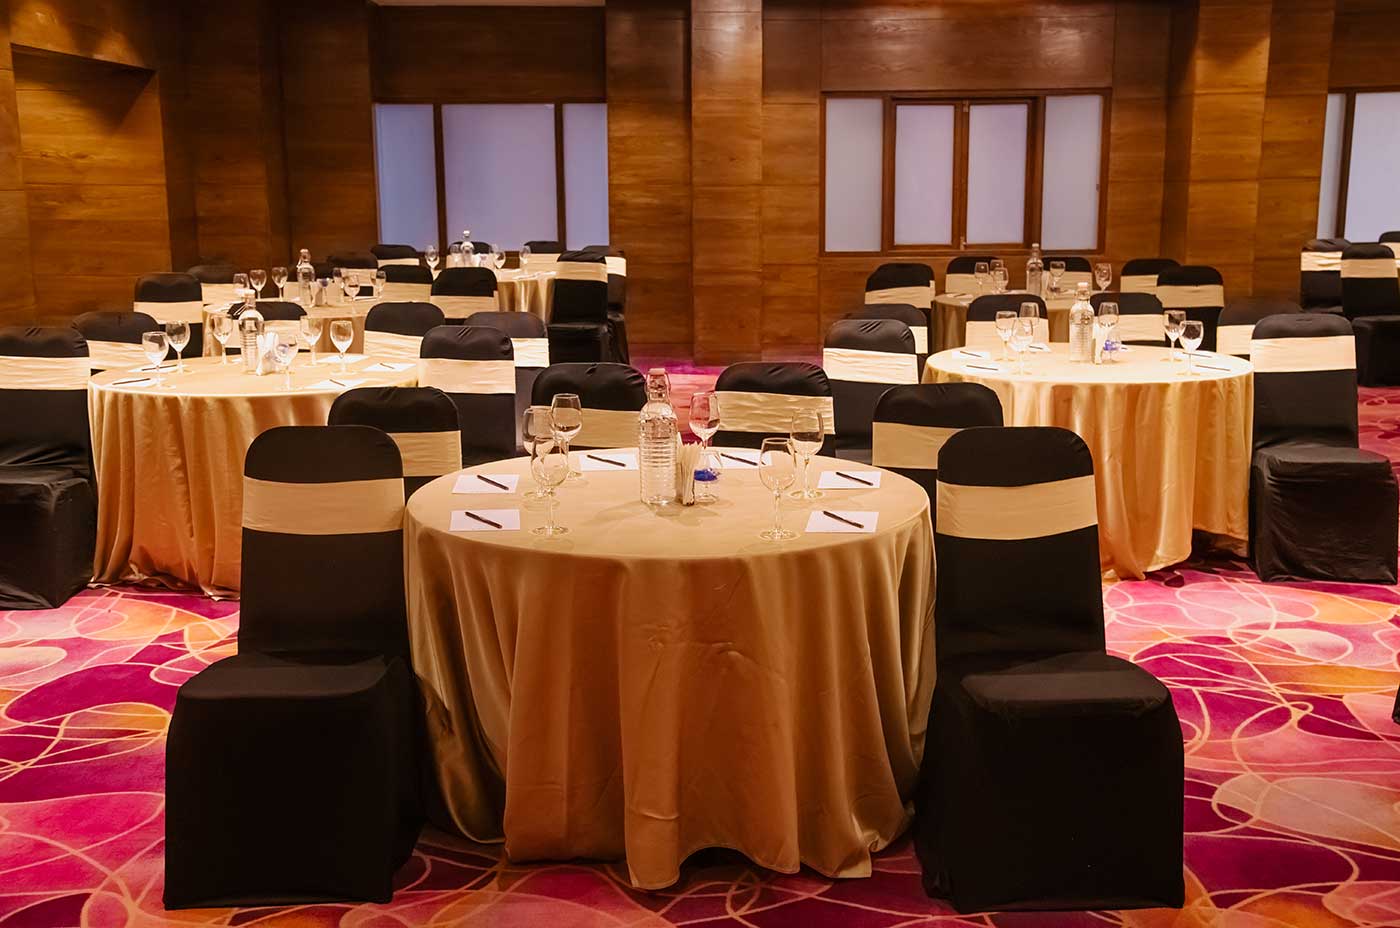 Banquets & Meeting Rooms